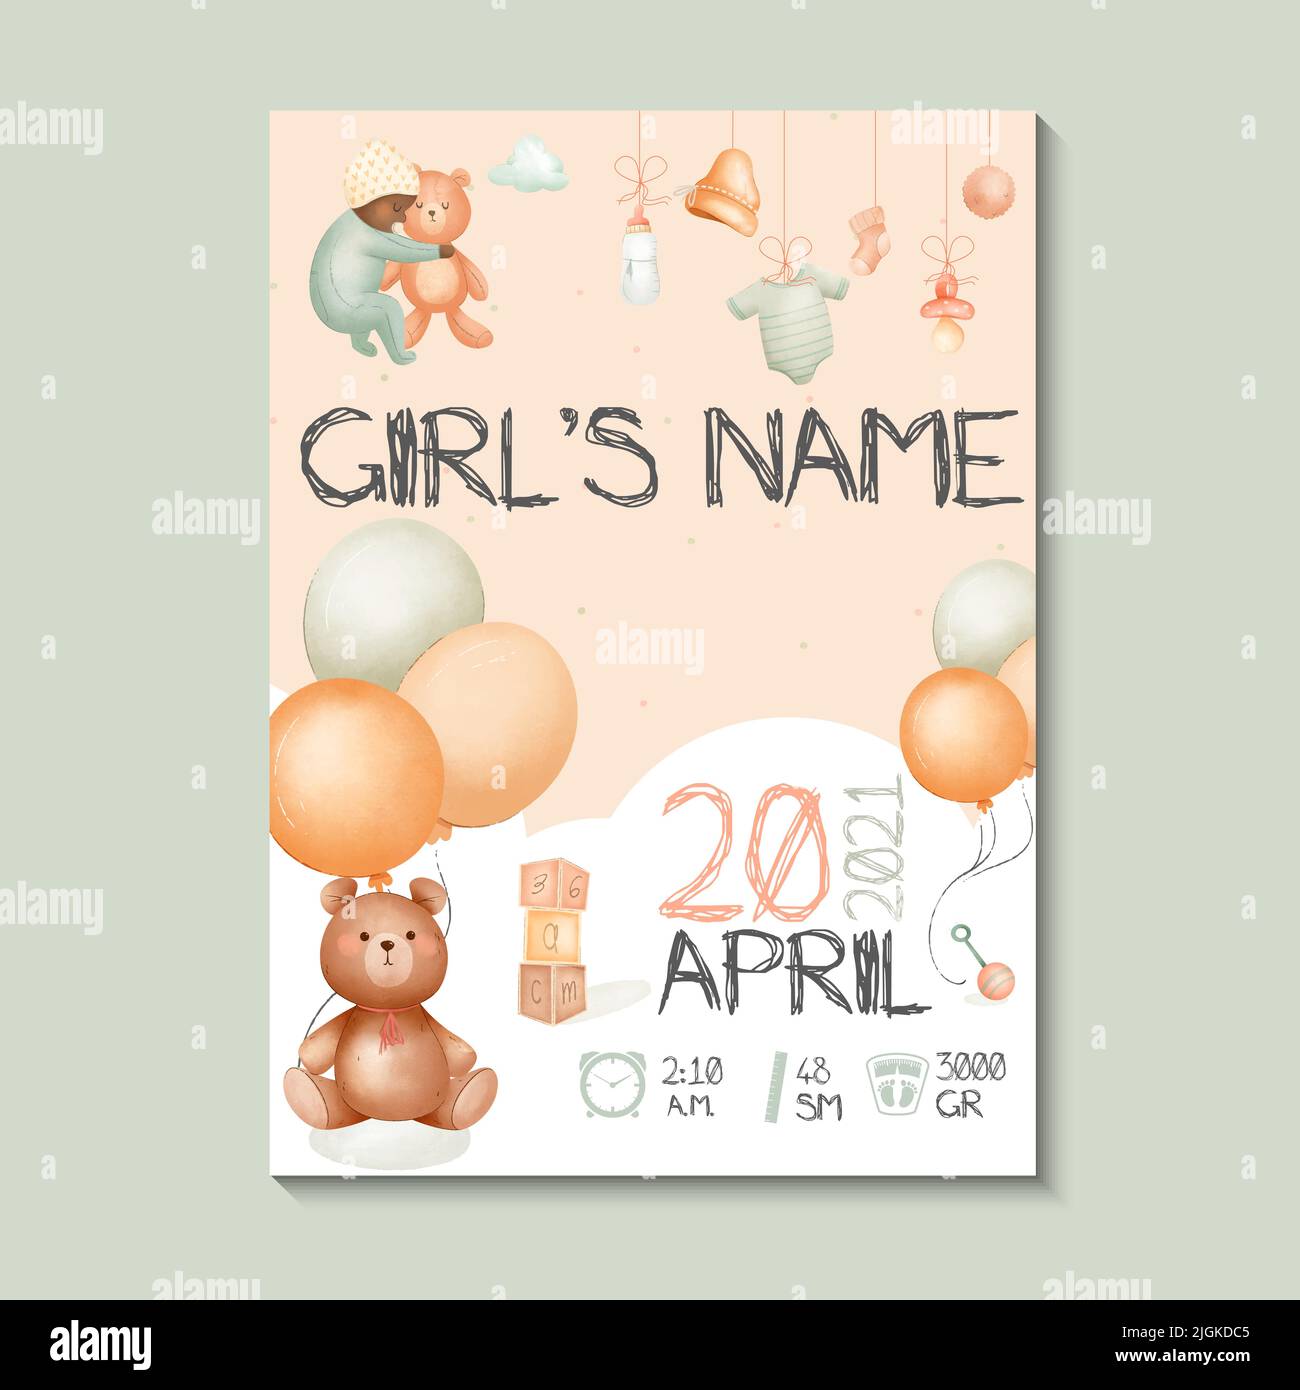 Girls posters, height, weight, date of birth. Teddy bear, balloon and baby stuff green, vector illustration on white background. Illustration Stock Vector